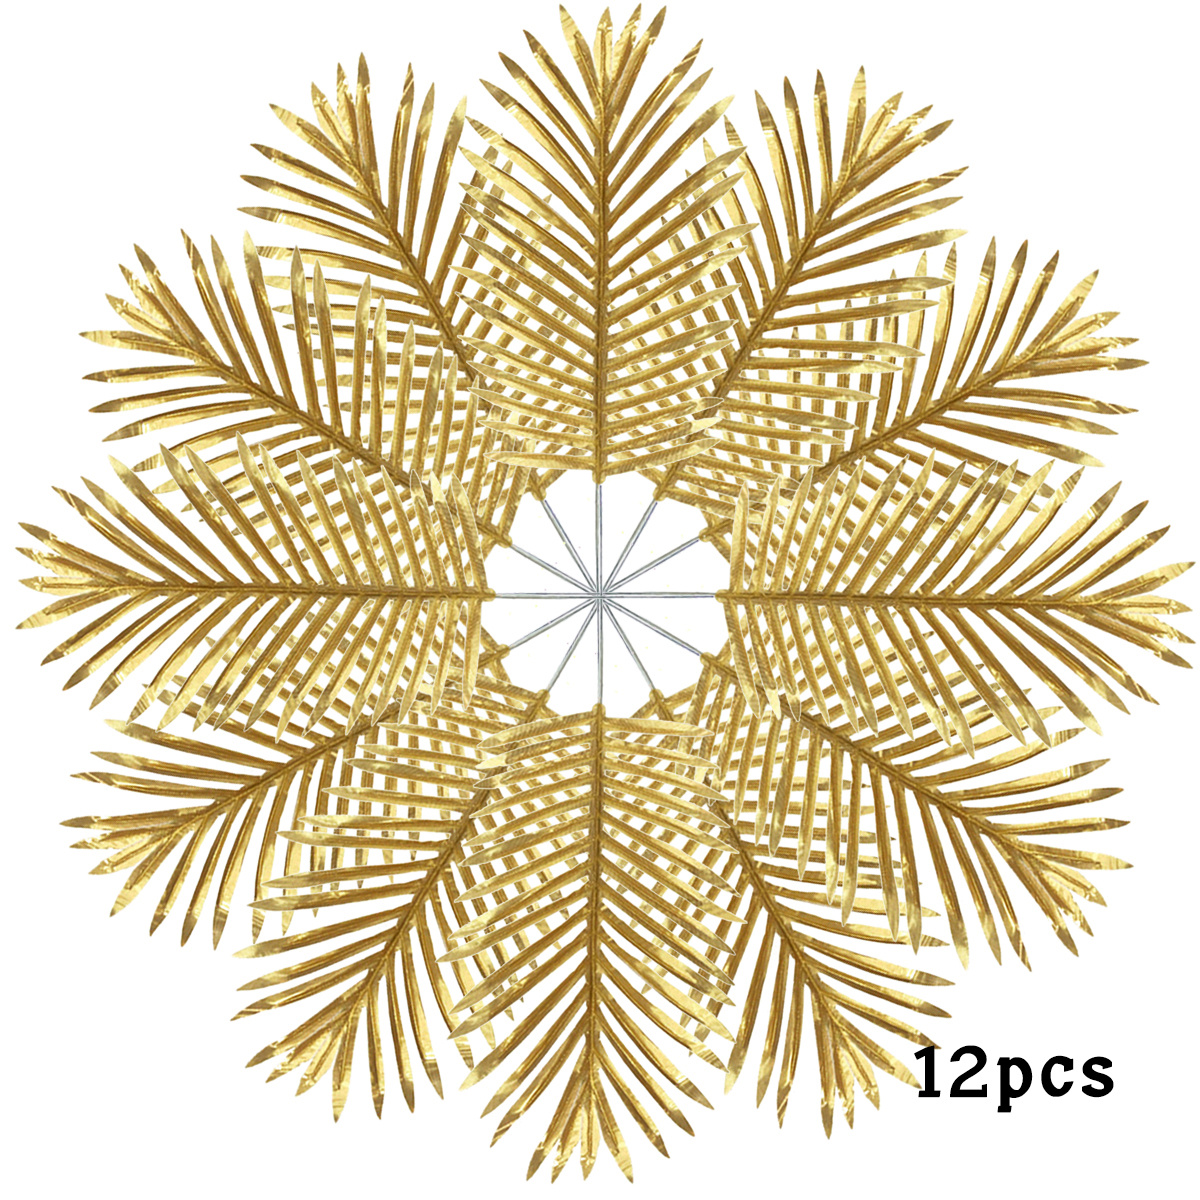  12 Pcs Artificial Gold Palm Leaves- 19.4 Realistic Golden  Plants Leaf Fake Gold Tropical Palm Leaf Faux Gold Leaves Decorations for  Balloon Garland Decor Wedding Birthday Tropical Jungle Party : Home